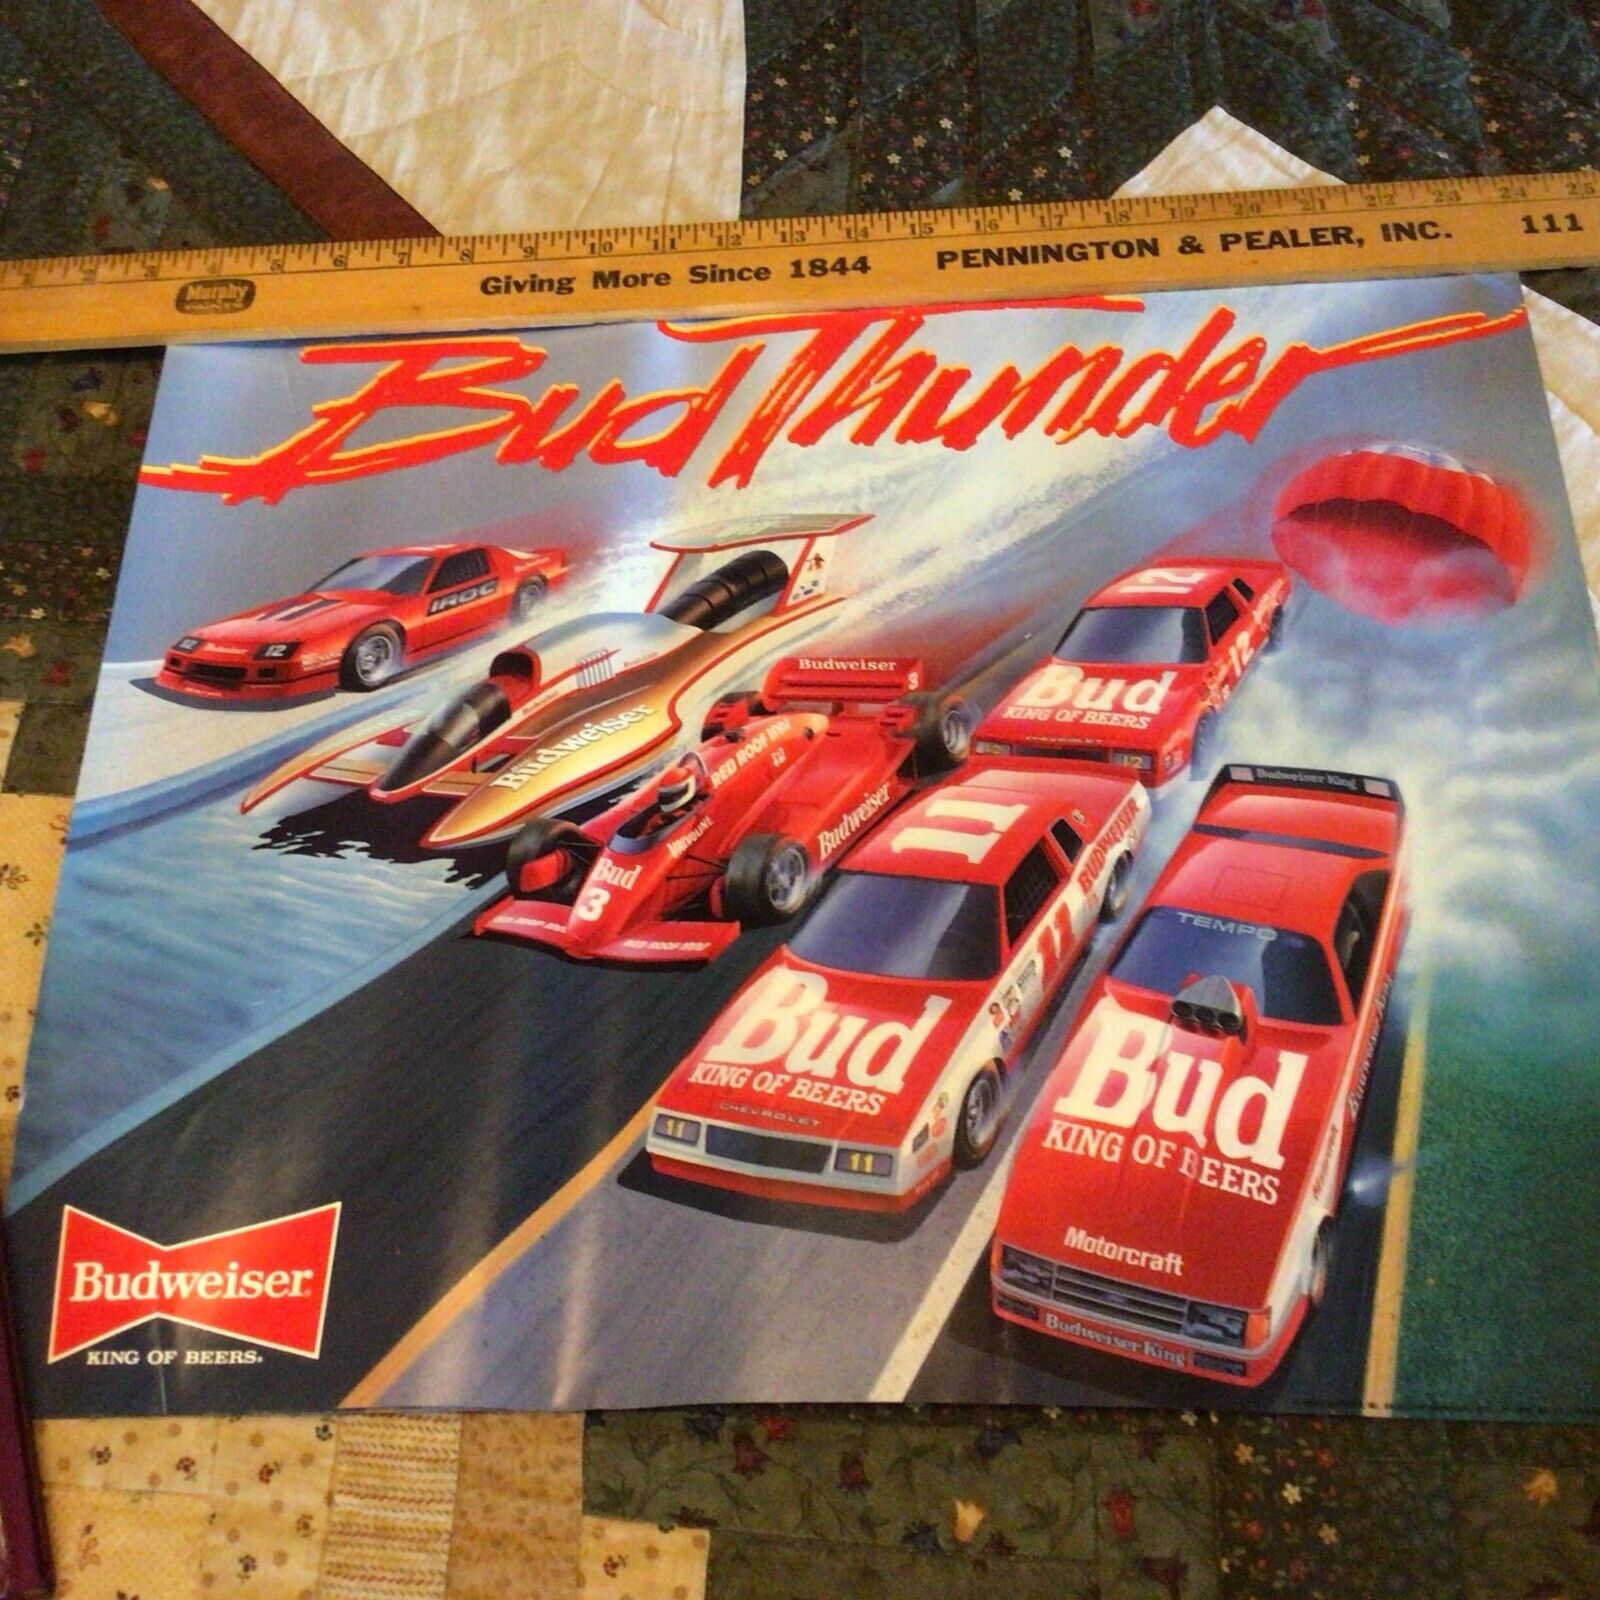 1986 Bud Thunder Poster,unused stored condition